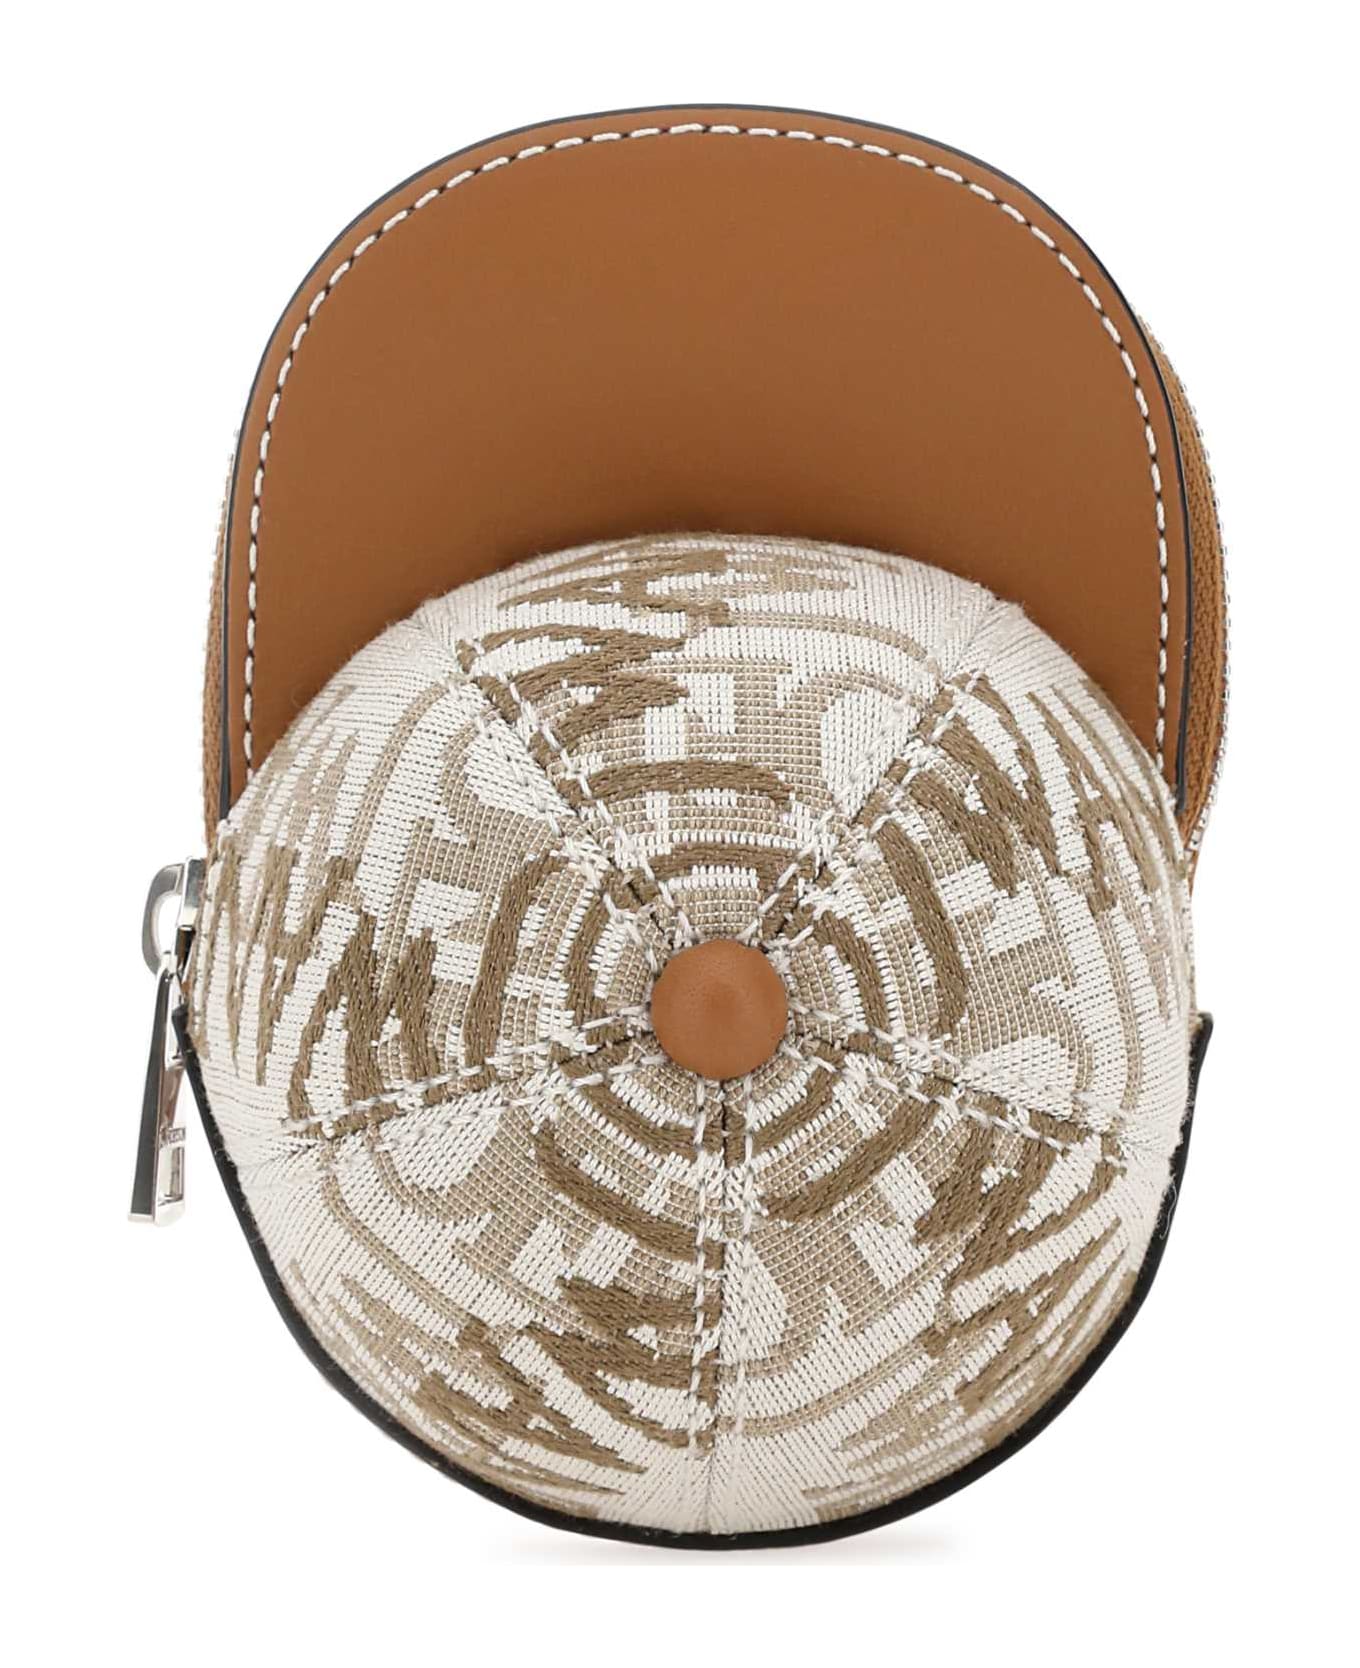 J.W. Anderson Two-tone Canvas And Leather Nano Cap Crossbody Bag - NATURALPECAN ショルダーバッグ